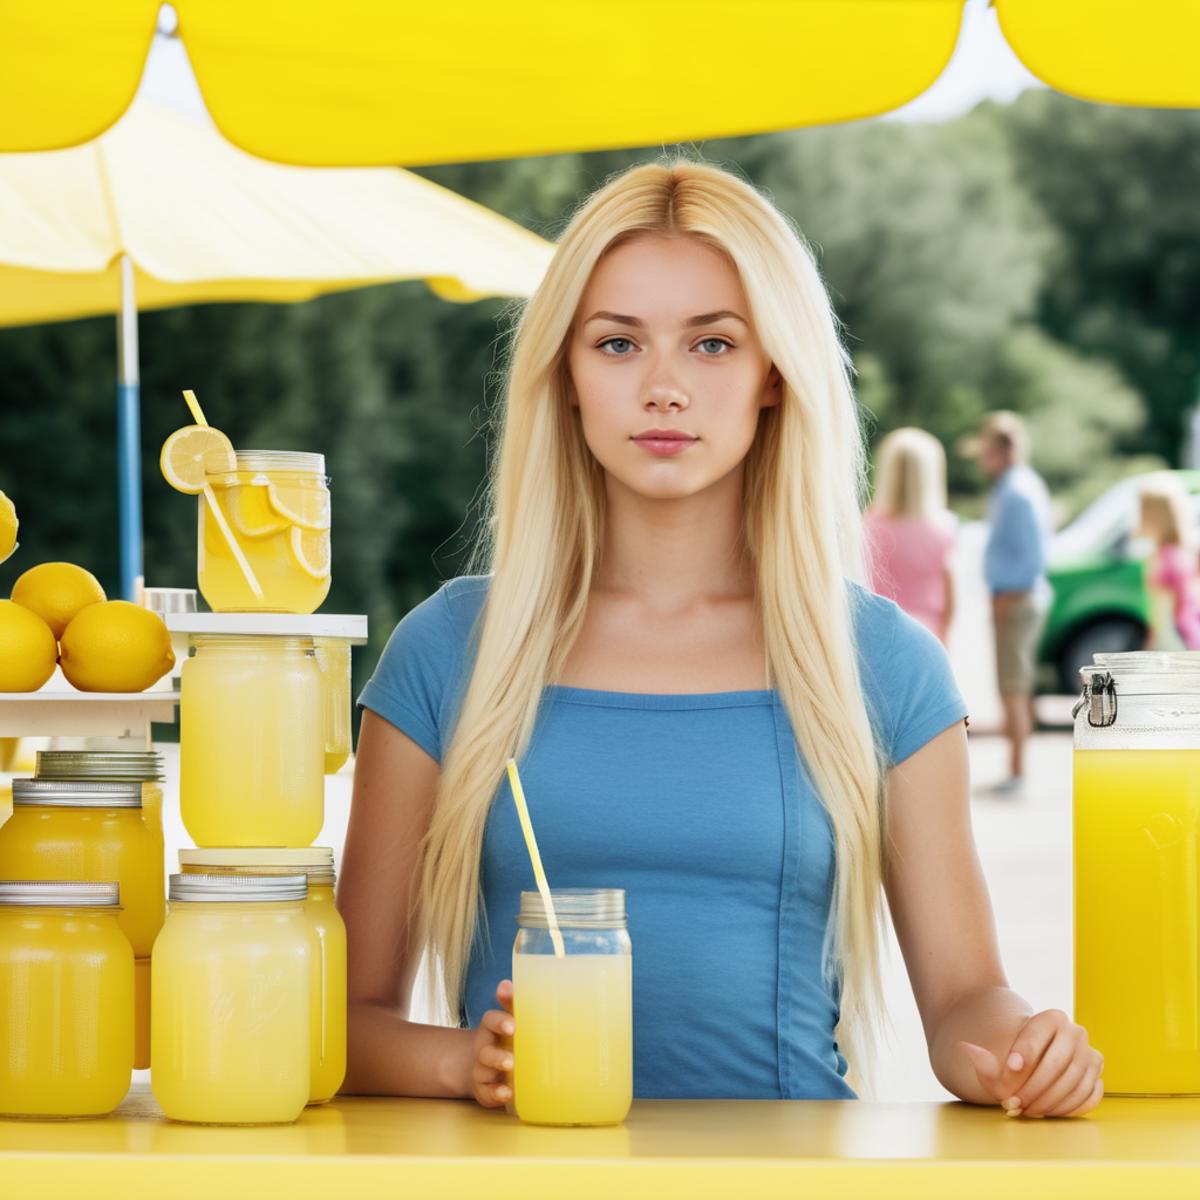 A young blonde woman with a blue shirt and long hair holding a glass of lemonade.